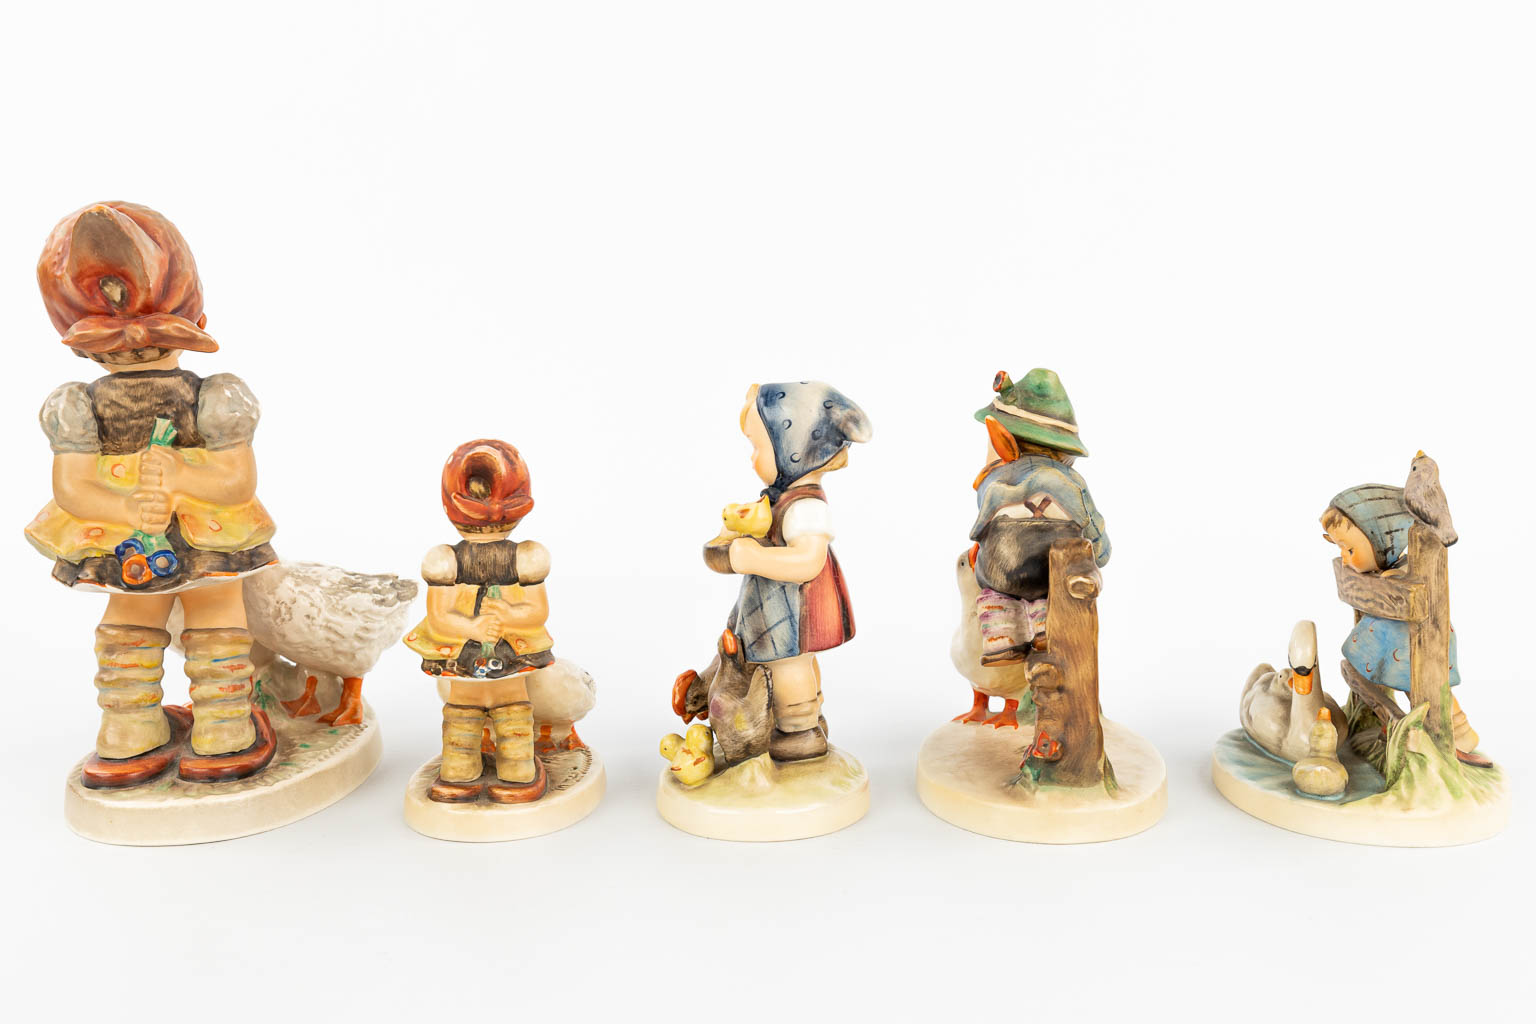 A collection of 5 statues made by Hummel. (H:20cm)